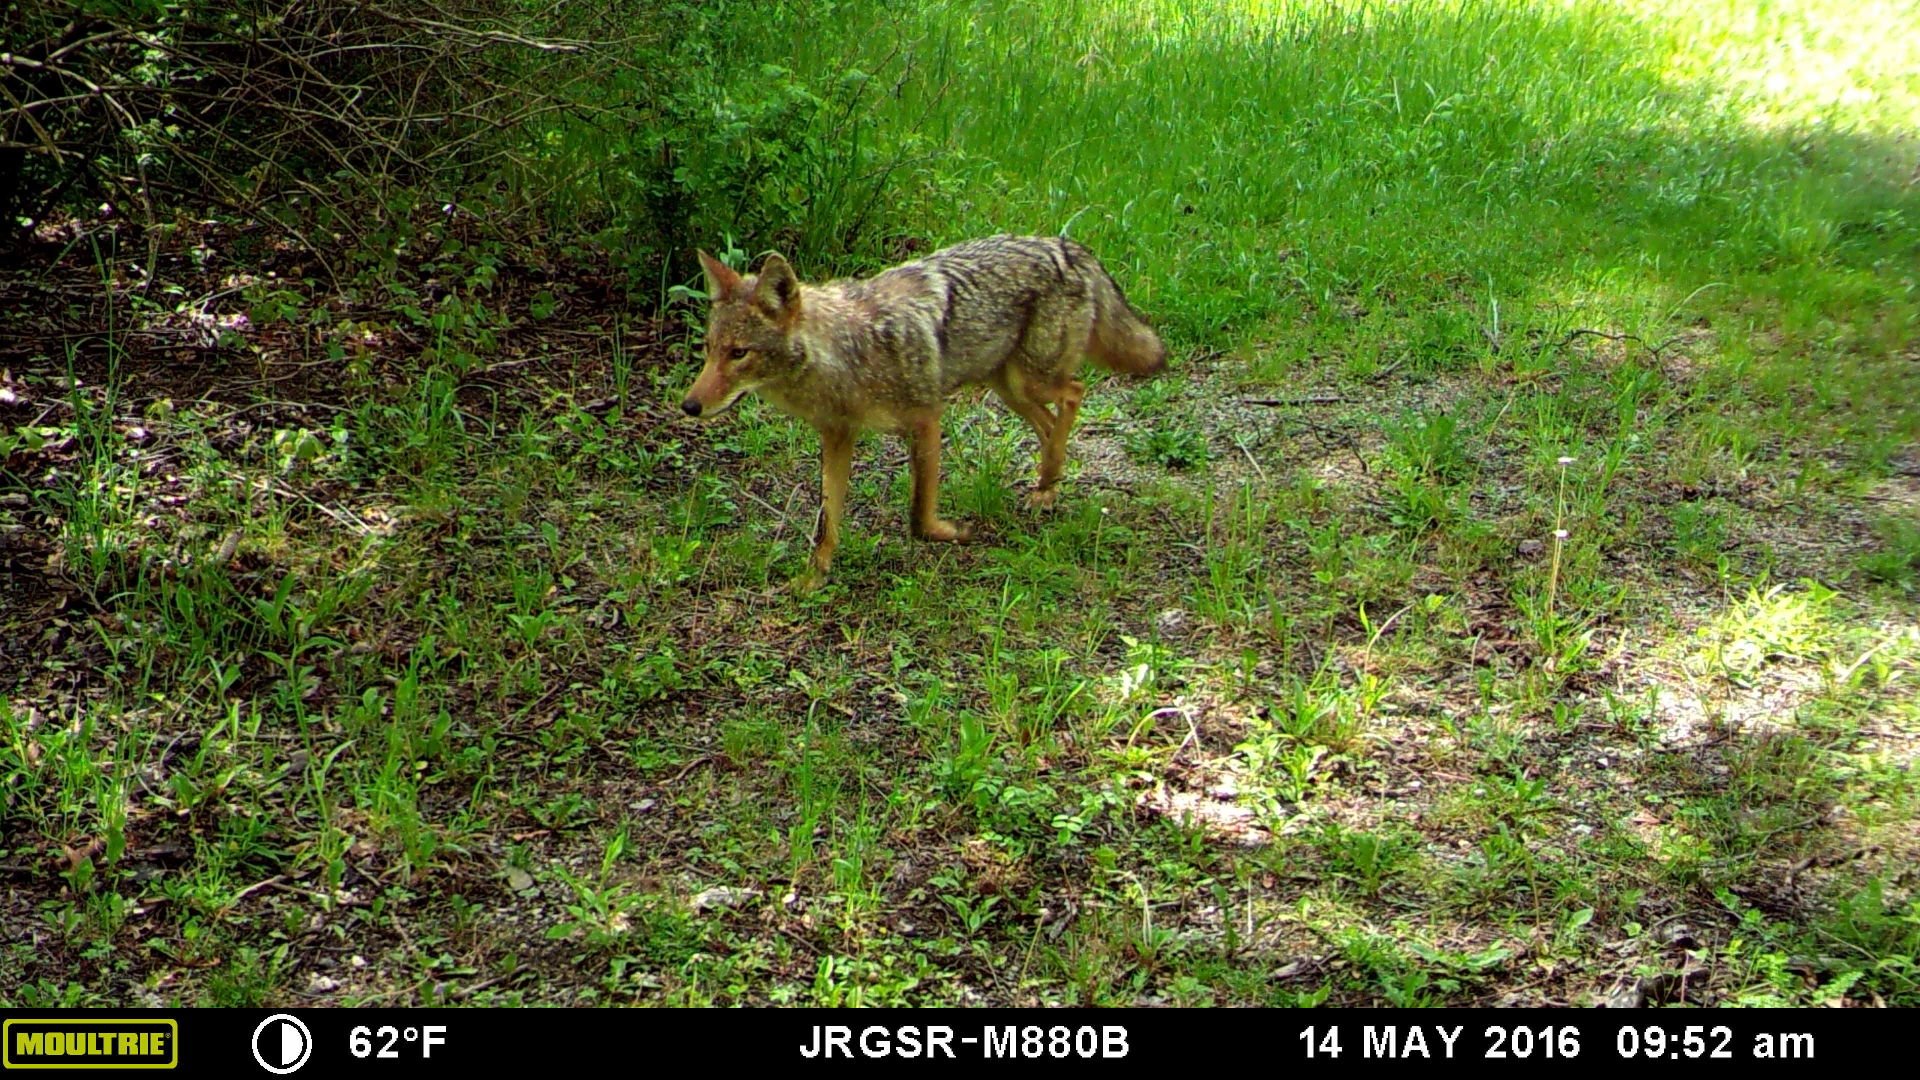 are there coyotes in new jersey